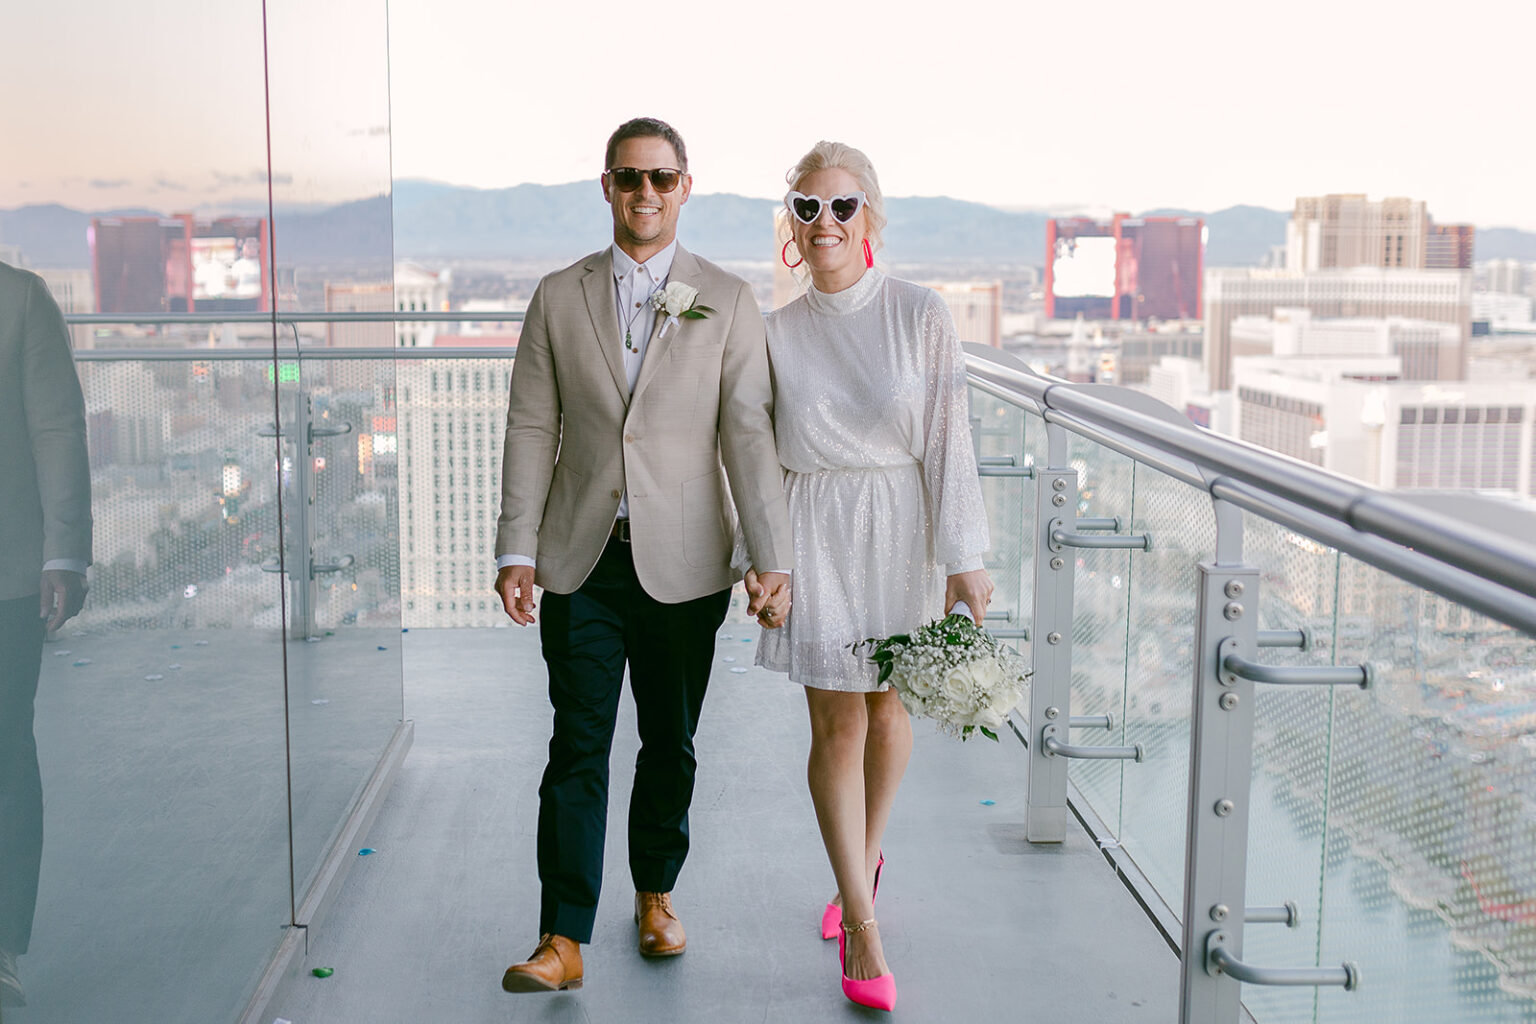 Bride and groom wearing sunglasses as they hold hands during their elopement shoot arranged by Elopement Las Vegas